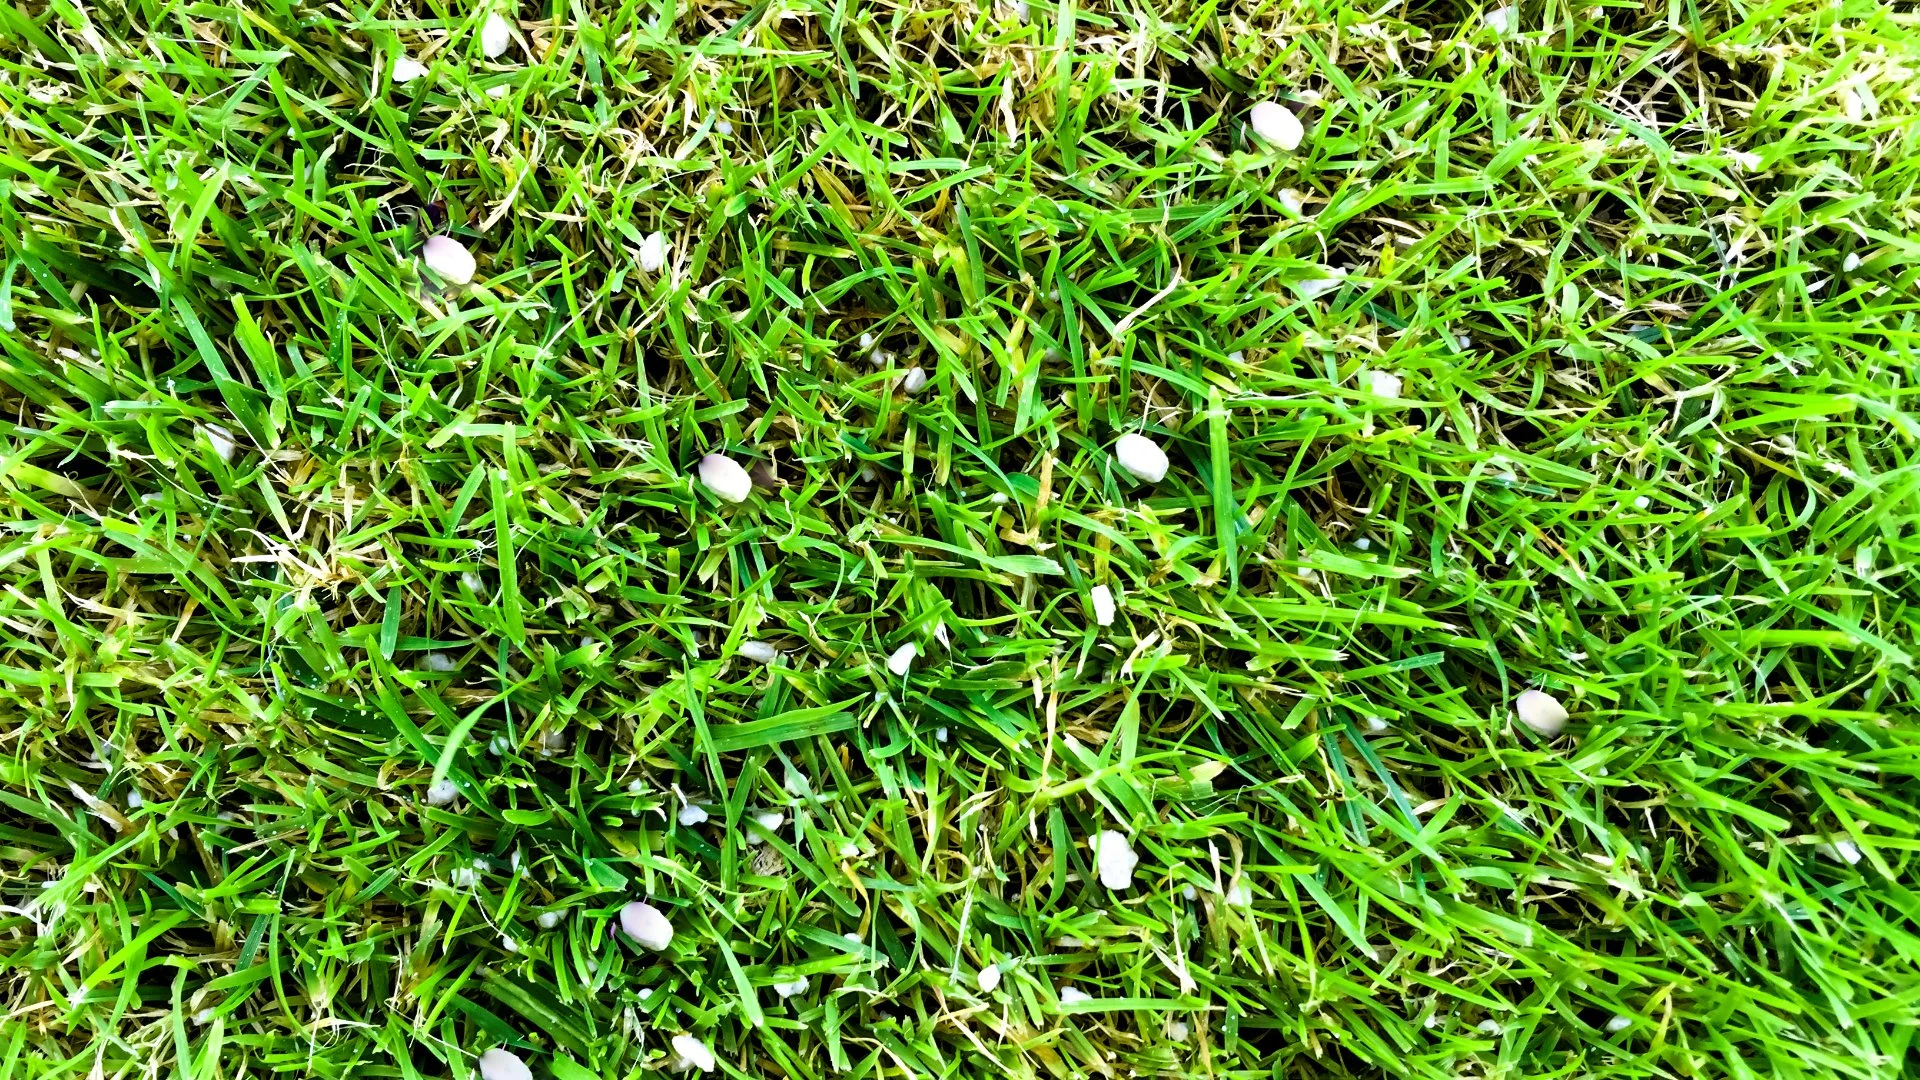 How Many Fertilizer Treatments Does My Lawn in North Carolina Need This Fall?